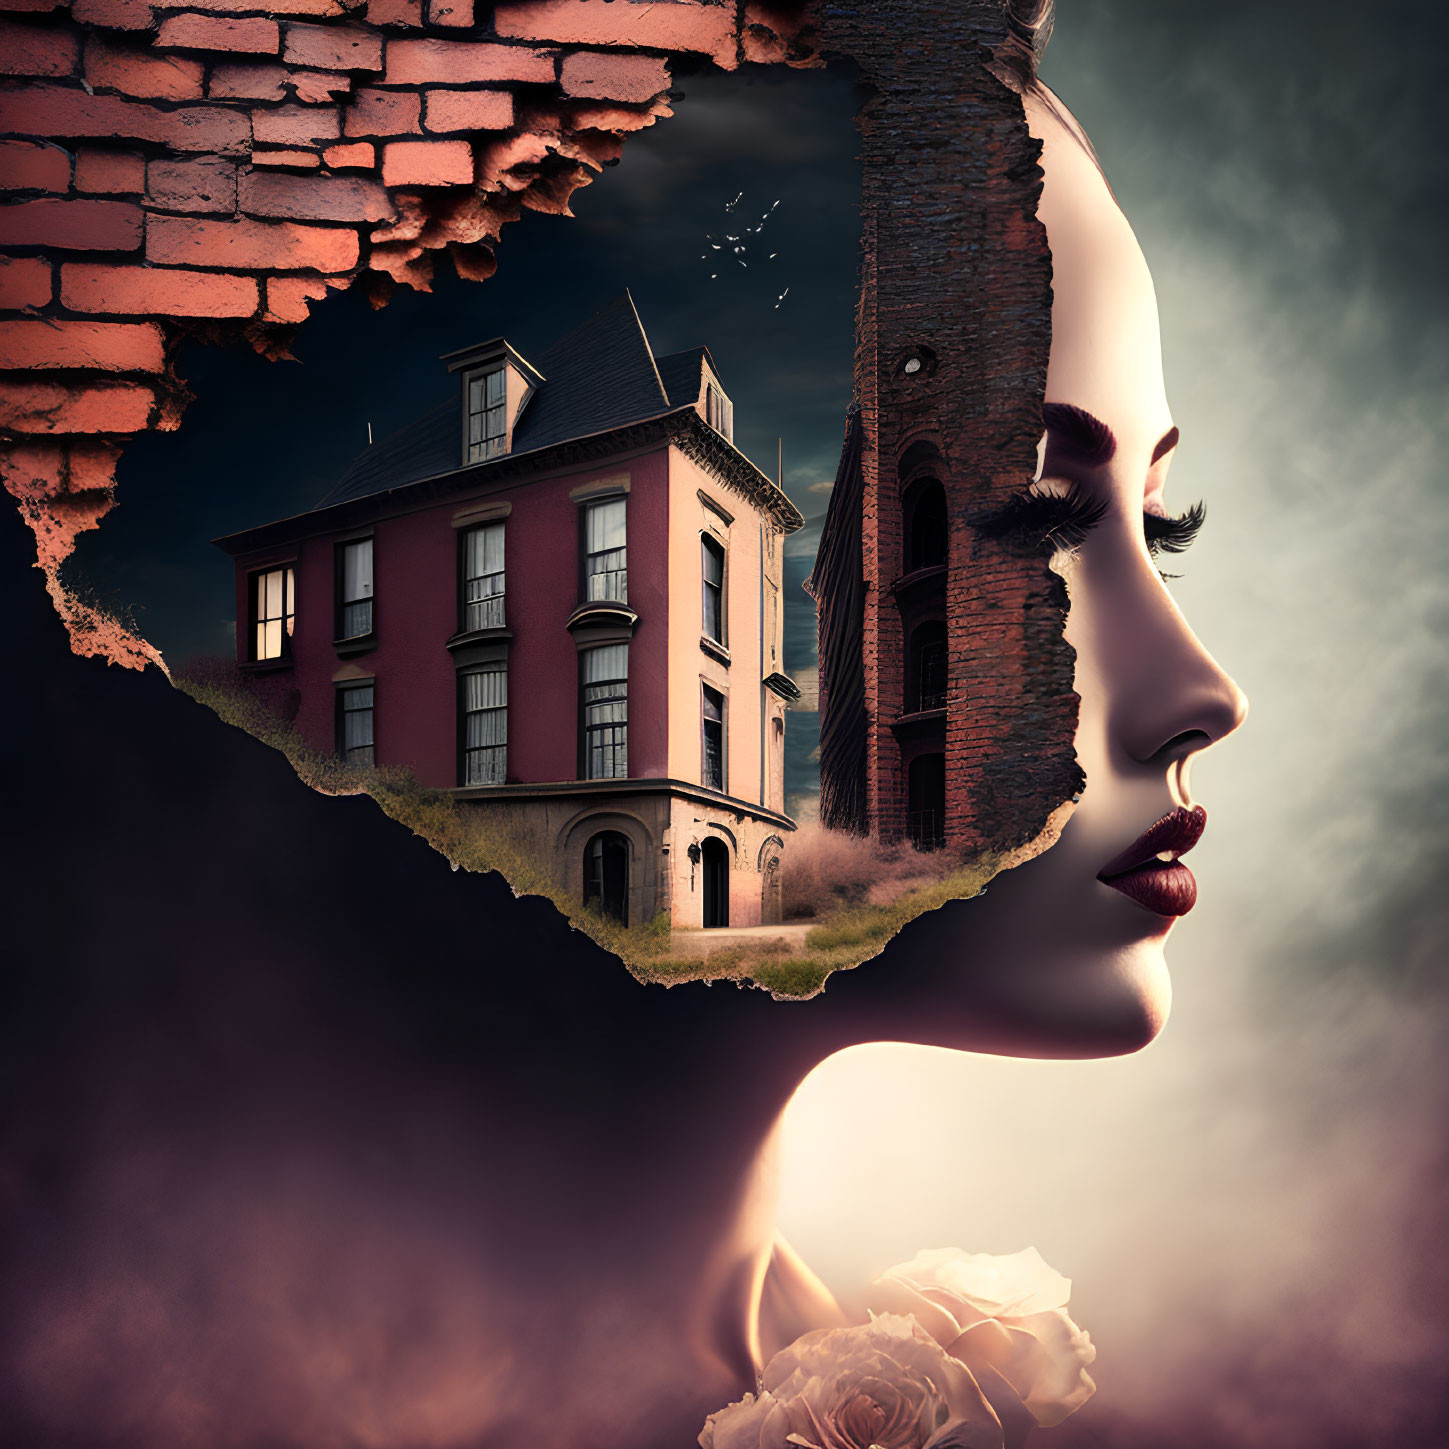 Surreal artwork: Woman silhouette merges with house in brick wall under moody sky, featuring rose